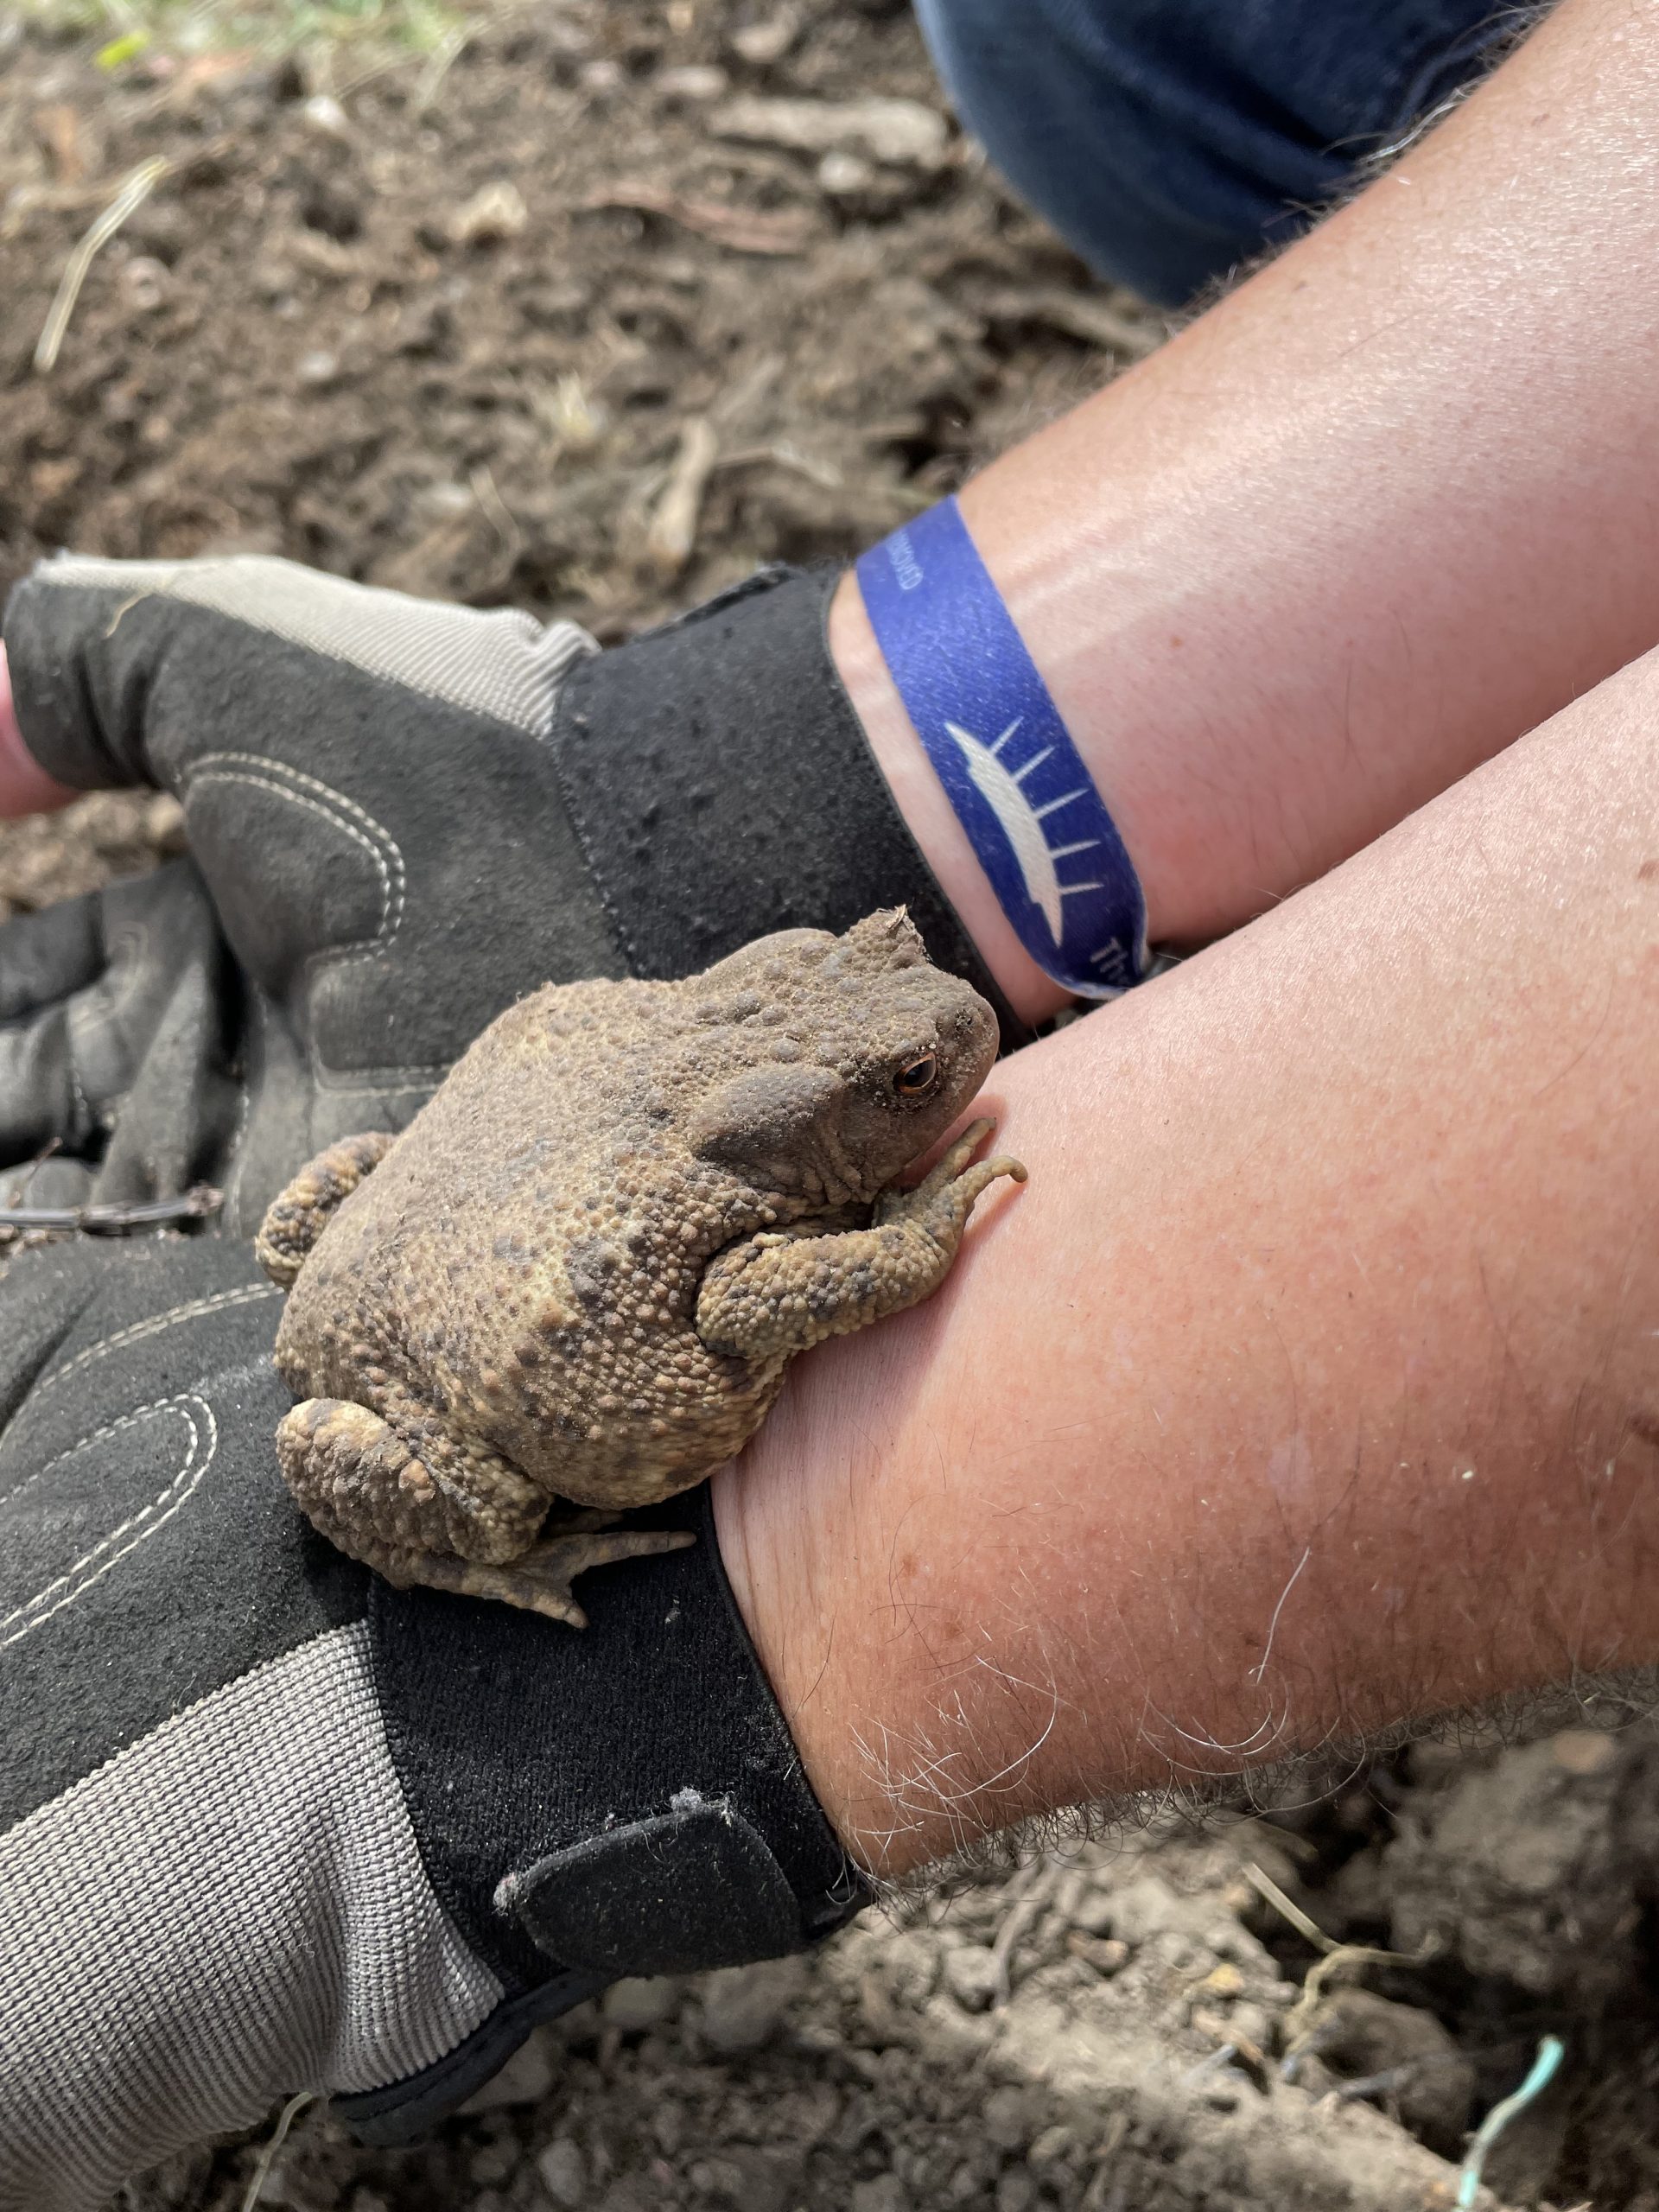 Common toad on somebody's arm